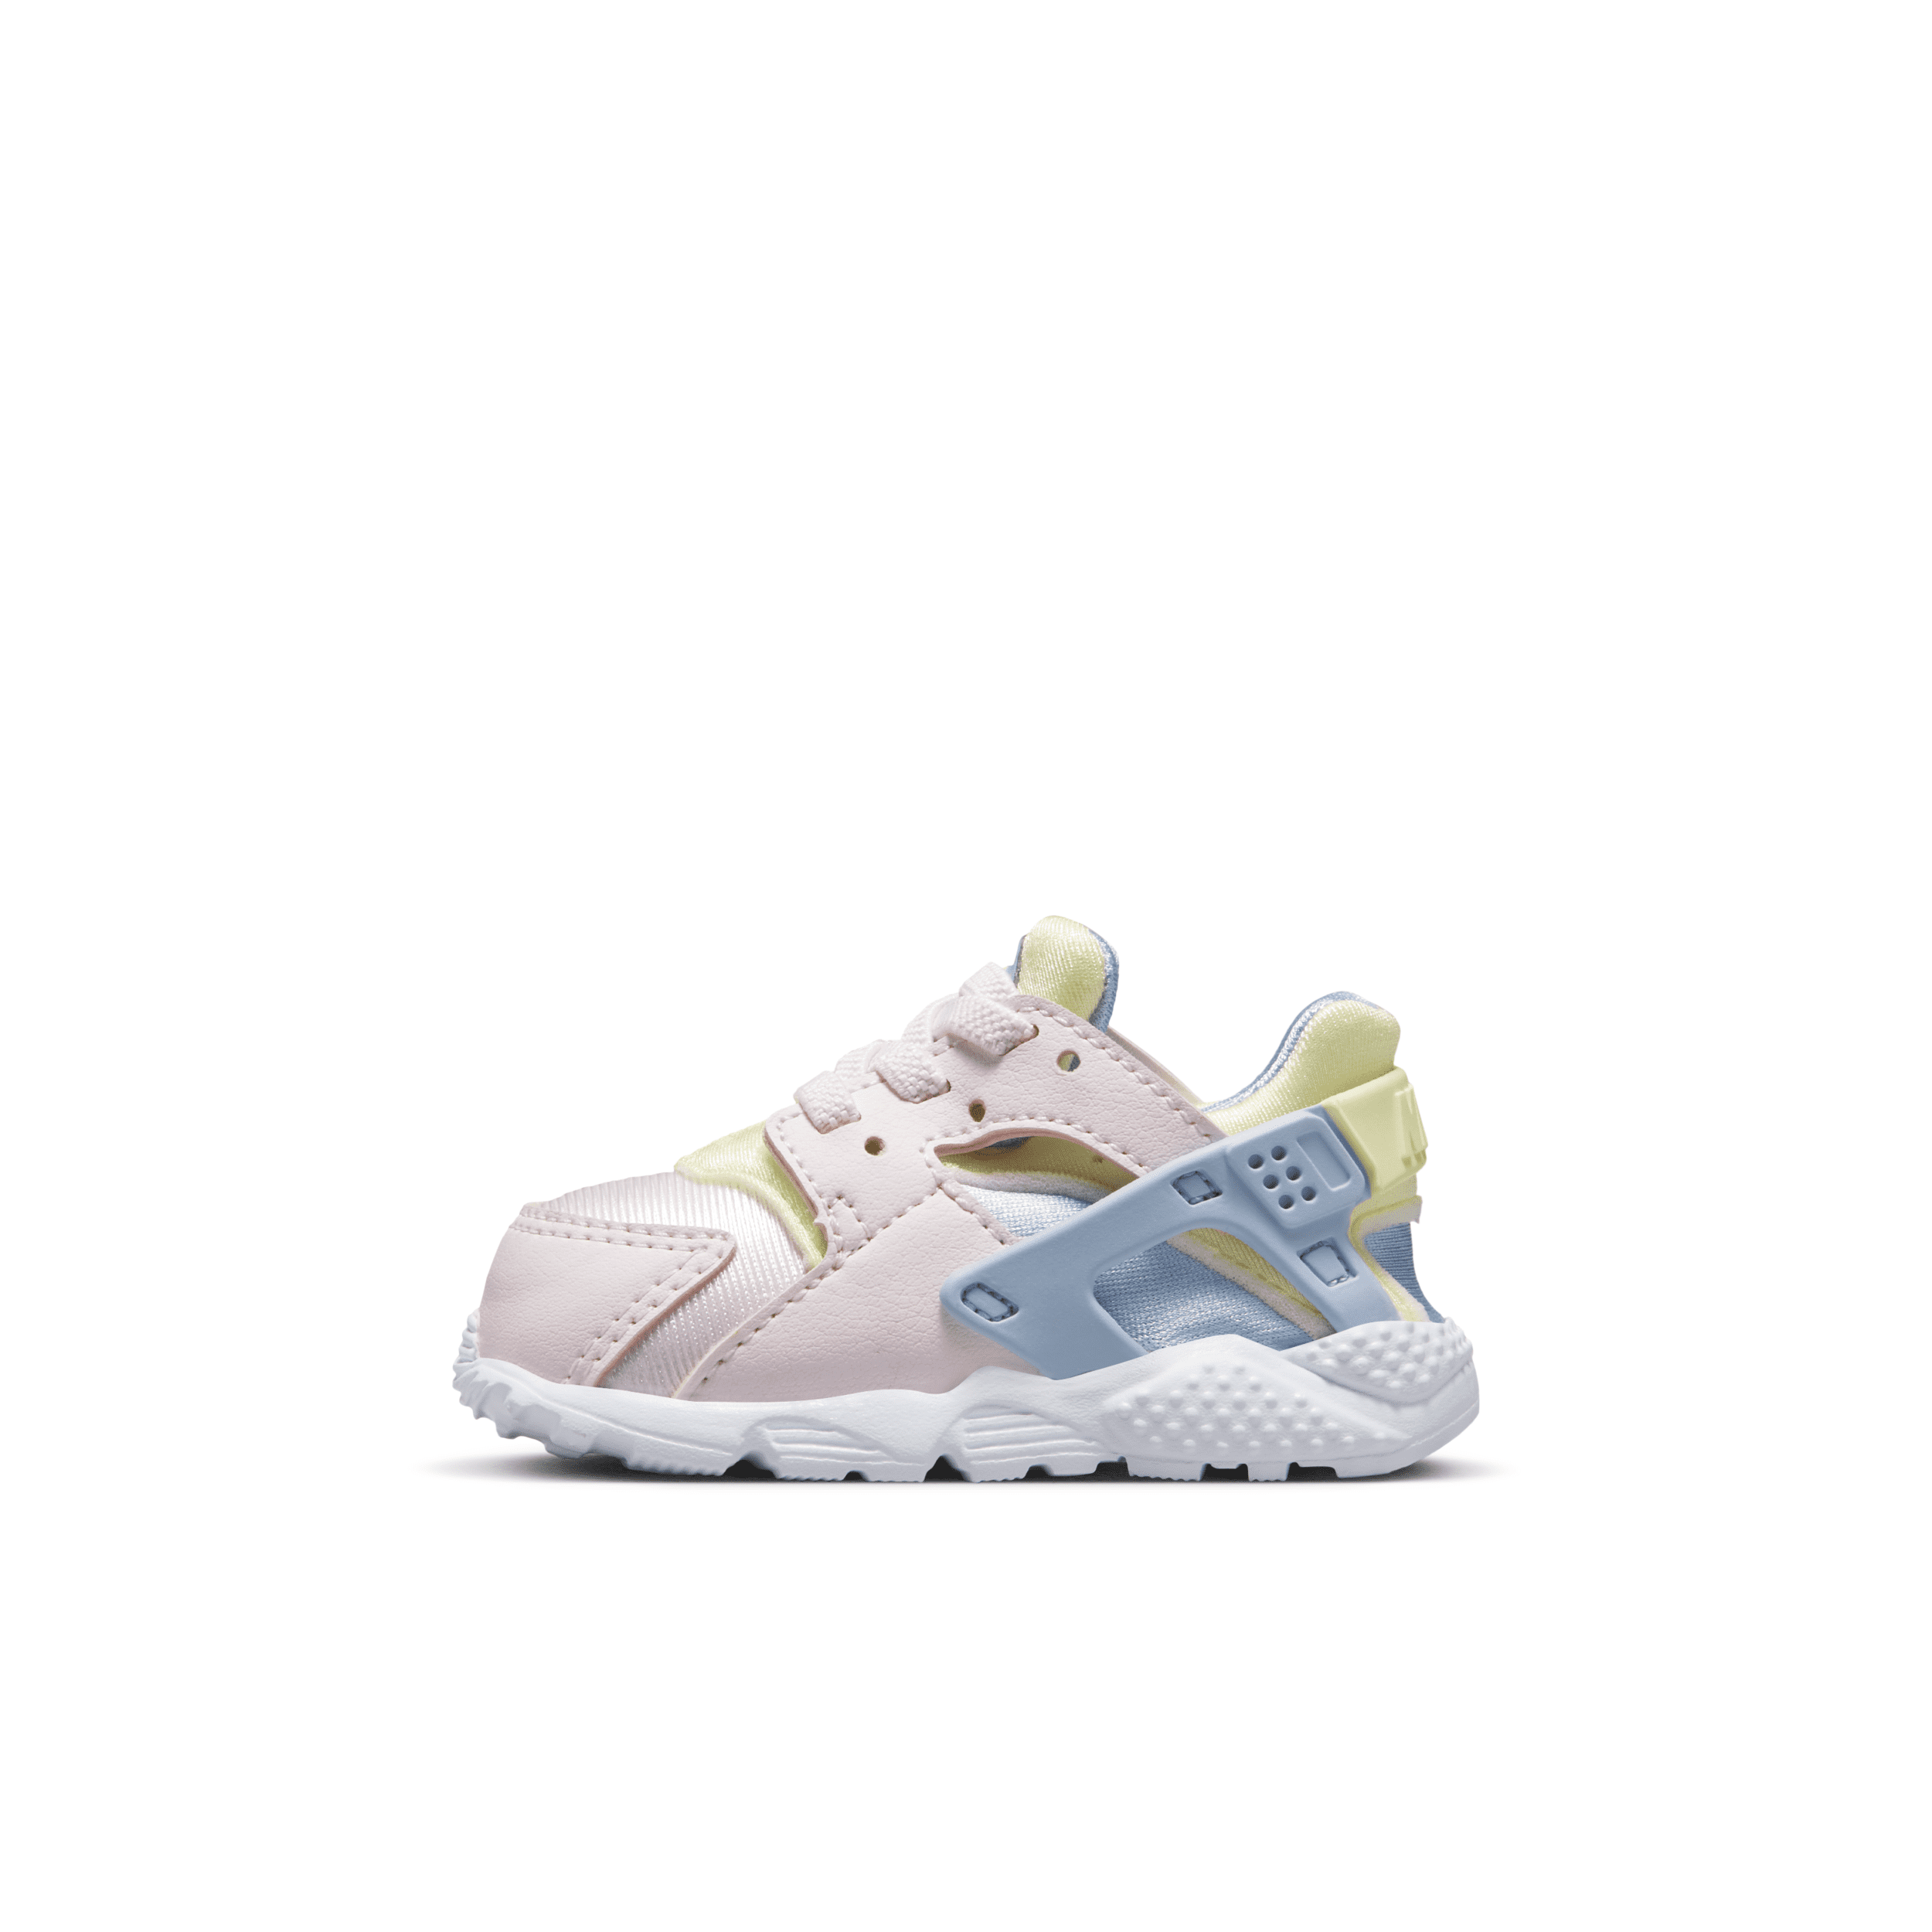 Nike Huarache Run Baby/toddler Shoes In Pearl Pink/citron Tint/white/cobalt Bliss